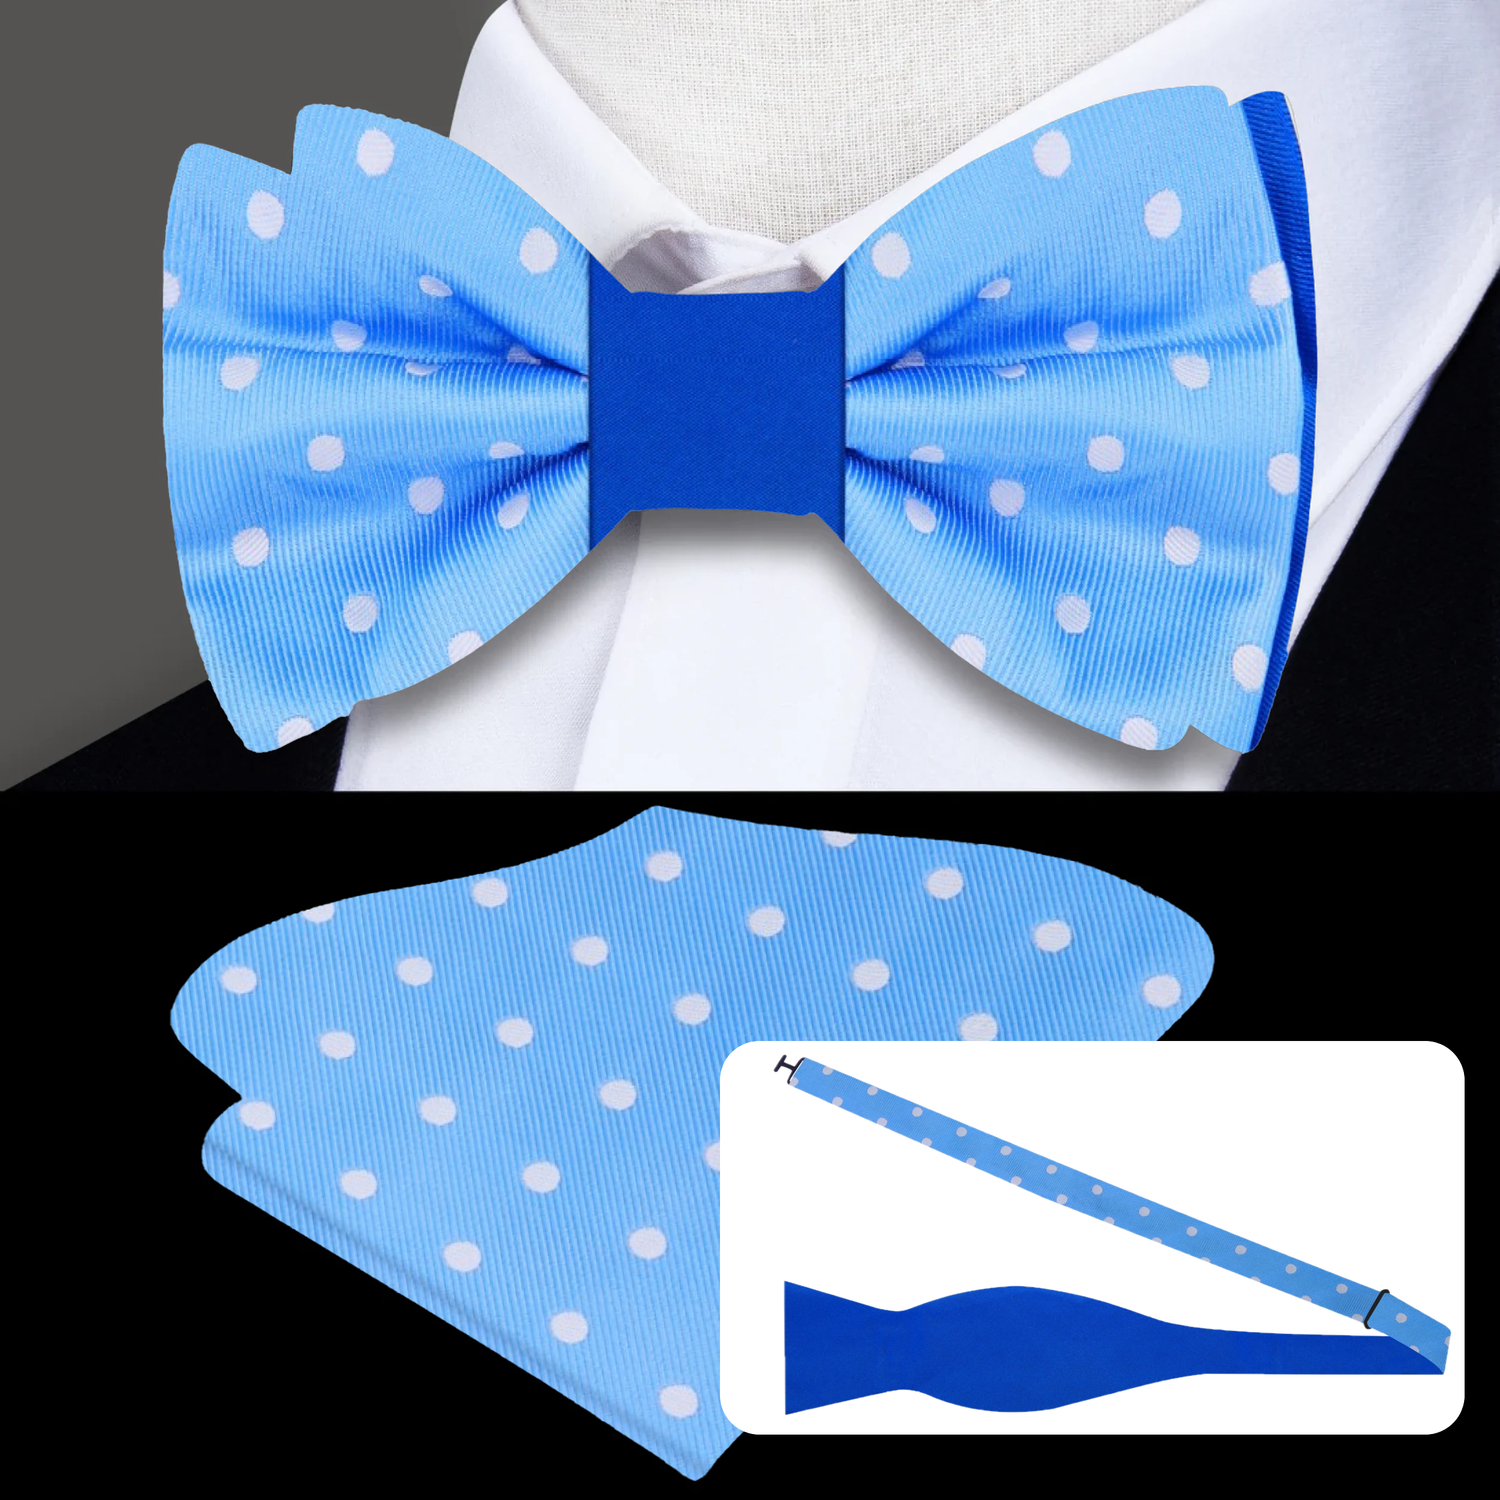 2 Shades of Blue Polka, White Polka/Solid Bow Tie and Pocket Square